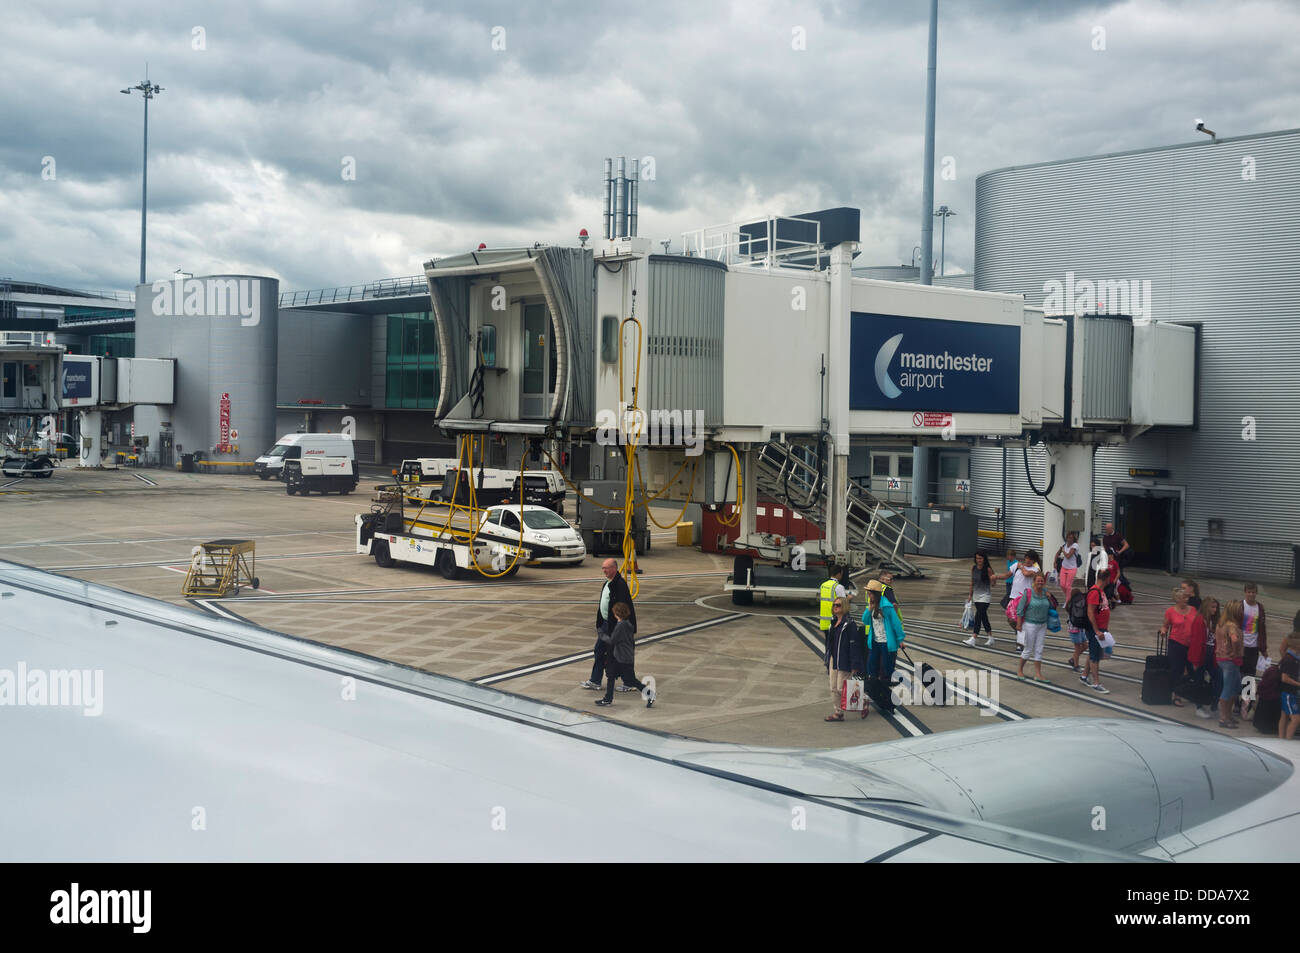 Manchester airport view from inside the cabin of a parked aircraft, England, UK. Stock Photo